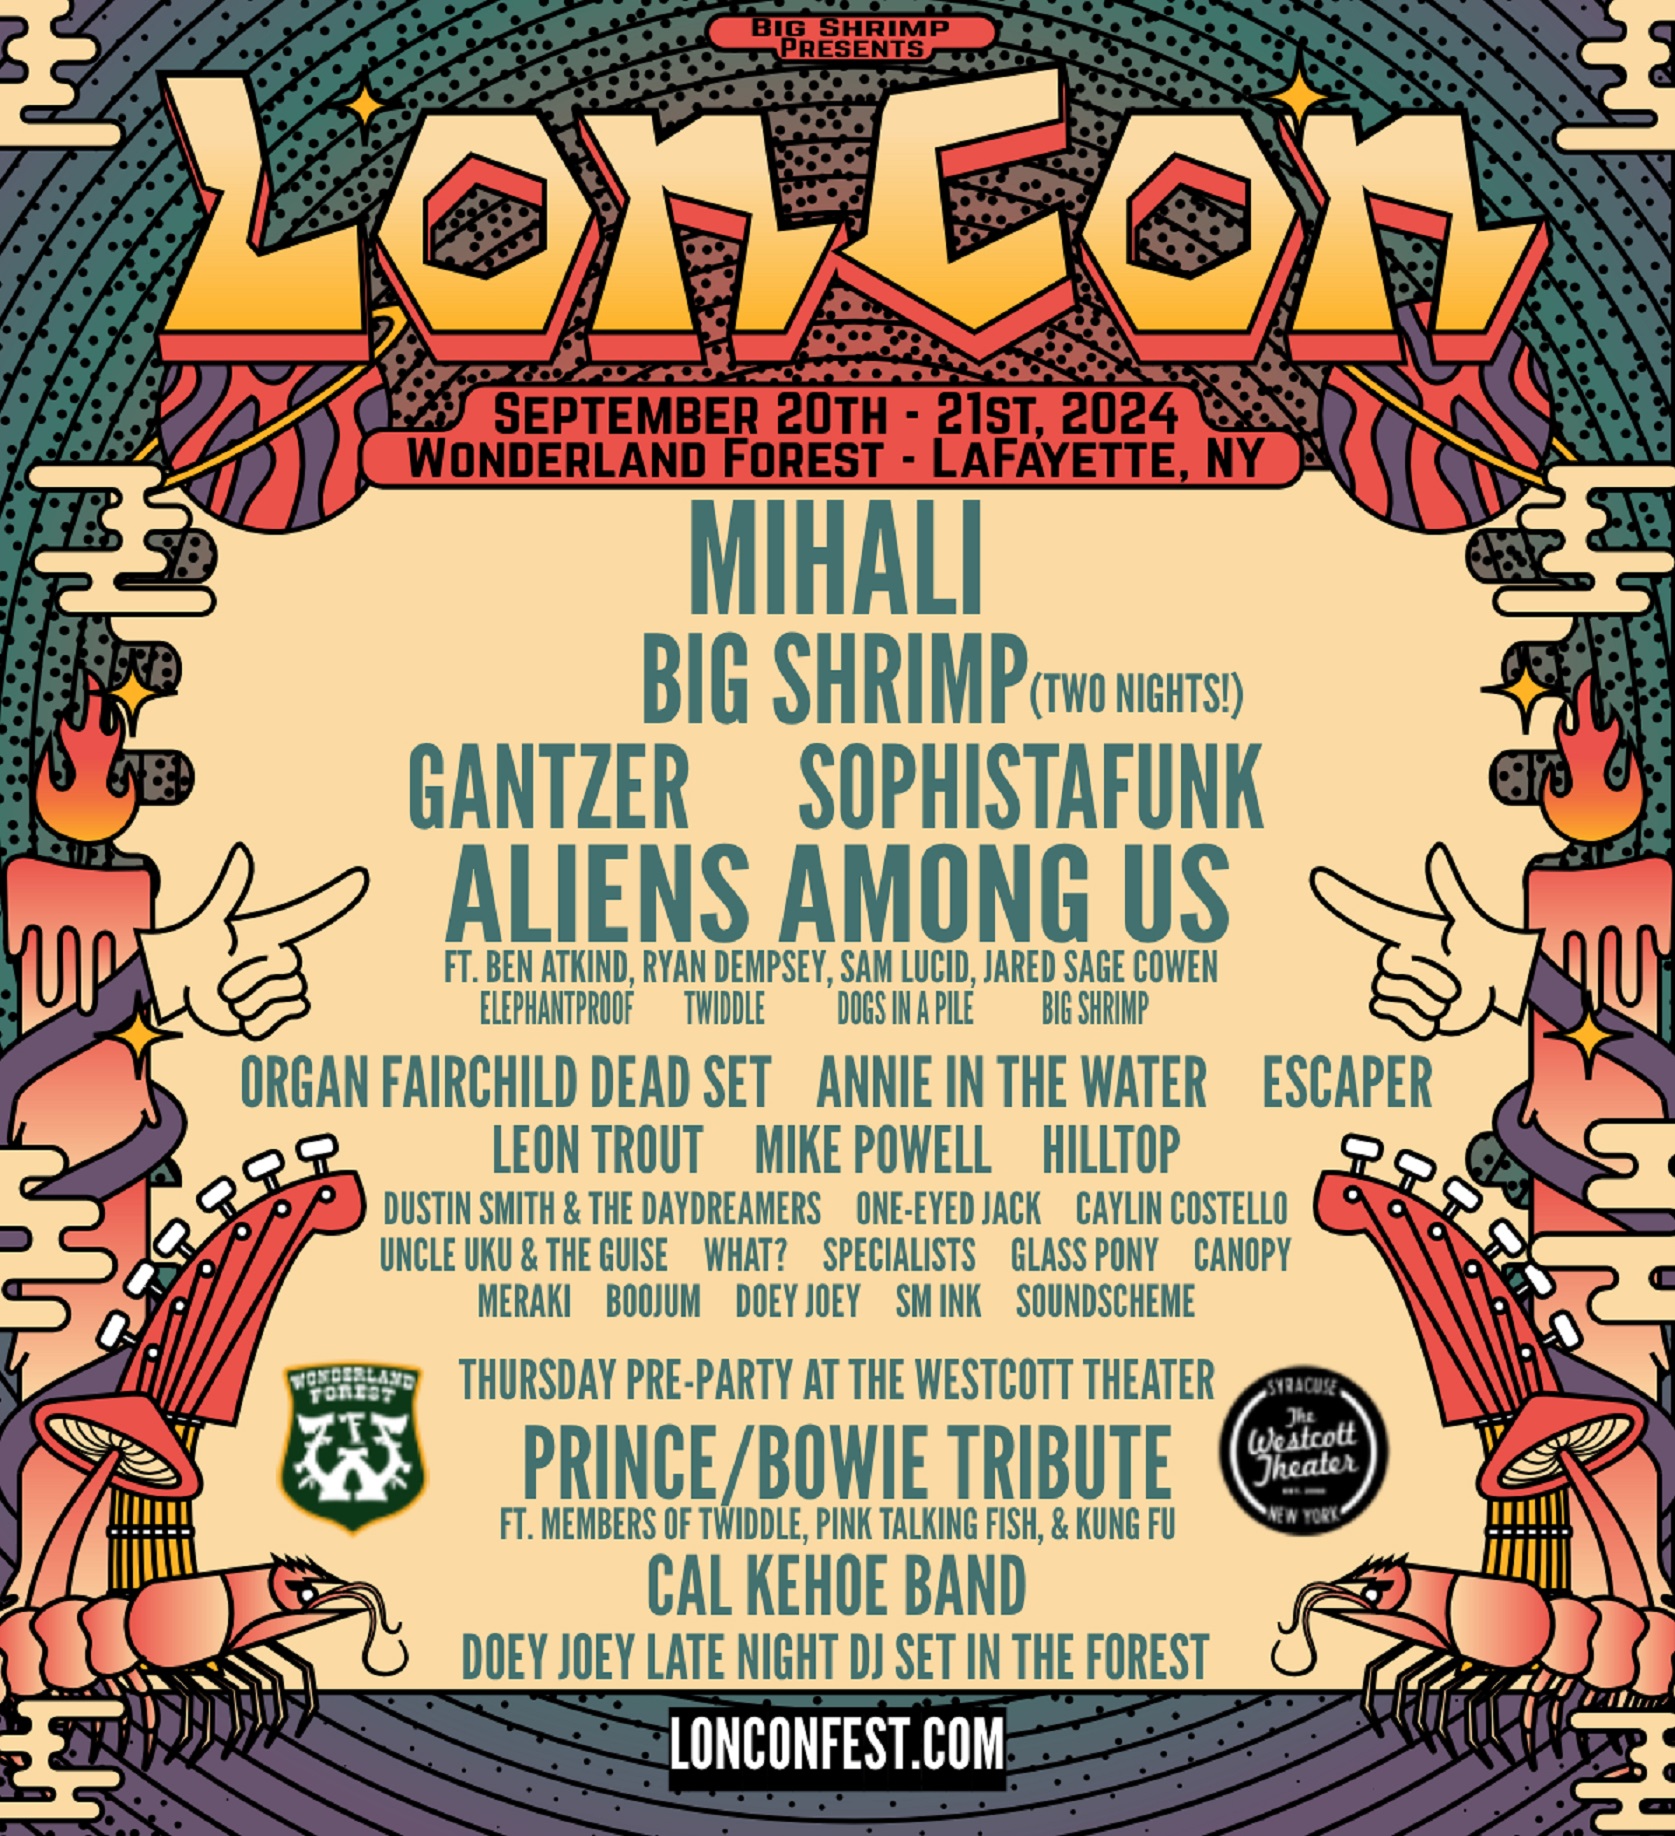 LonCon 2024: A Musical Wonderland in LaFayette, NY